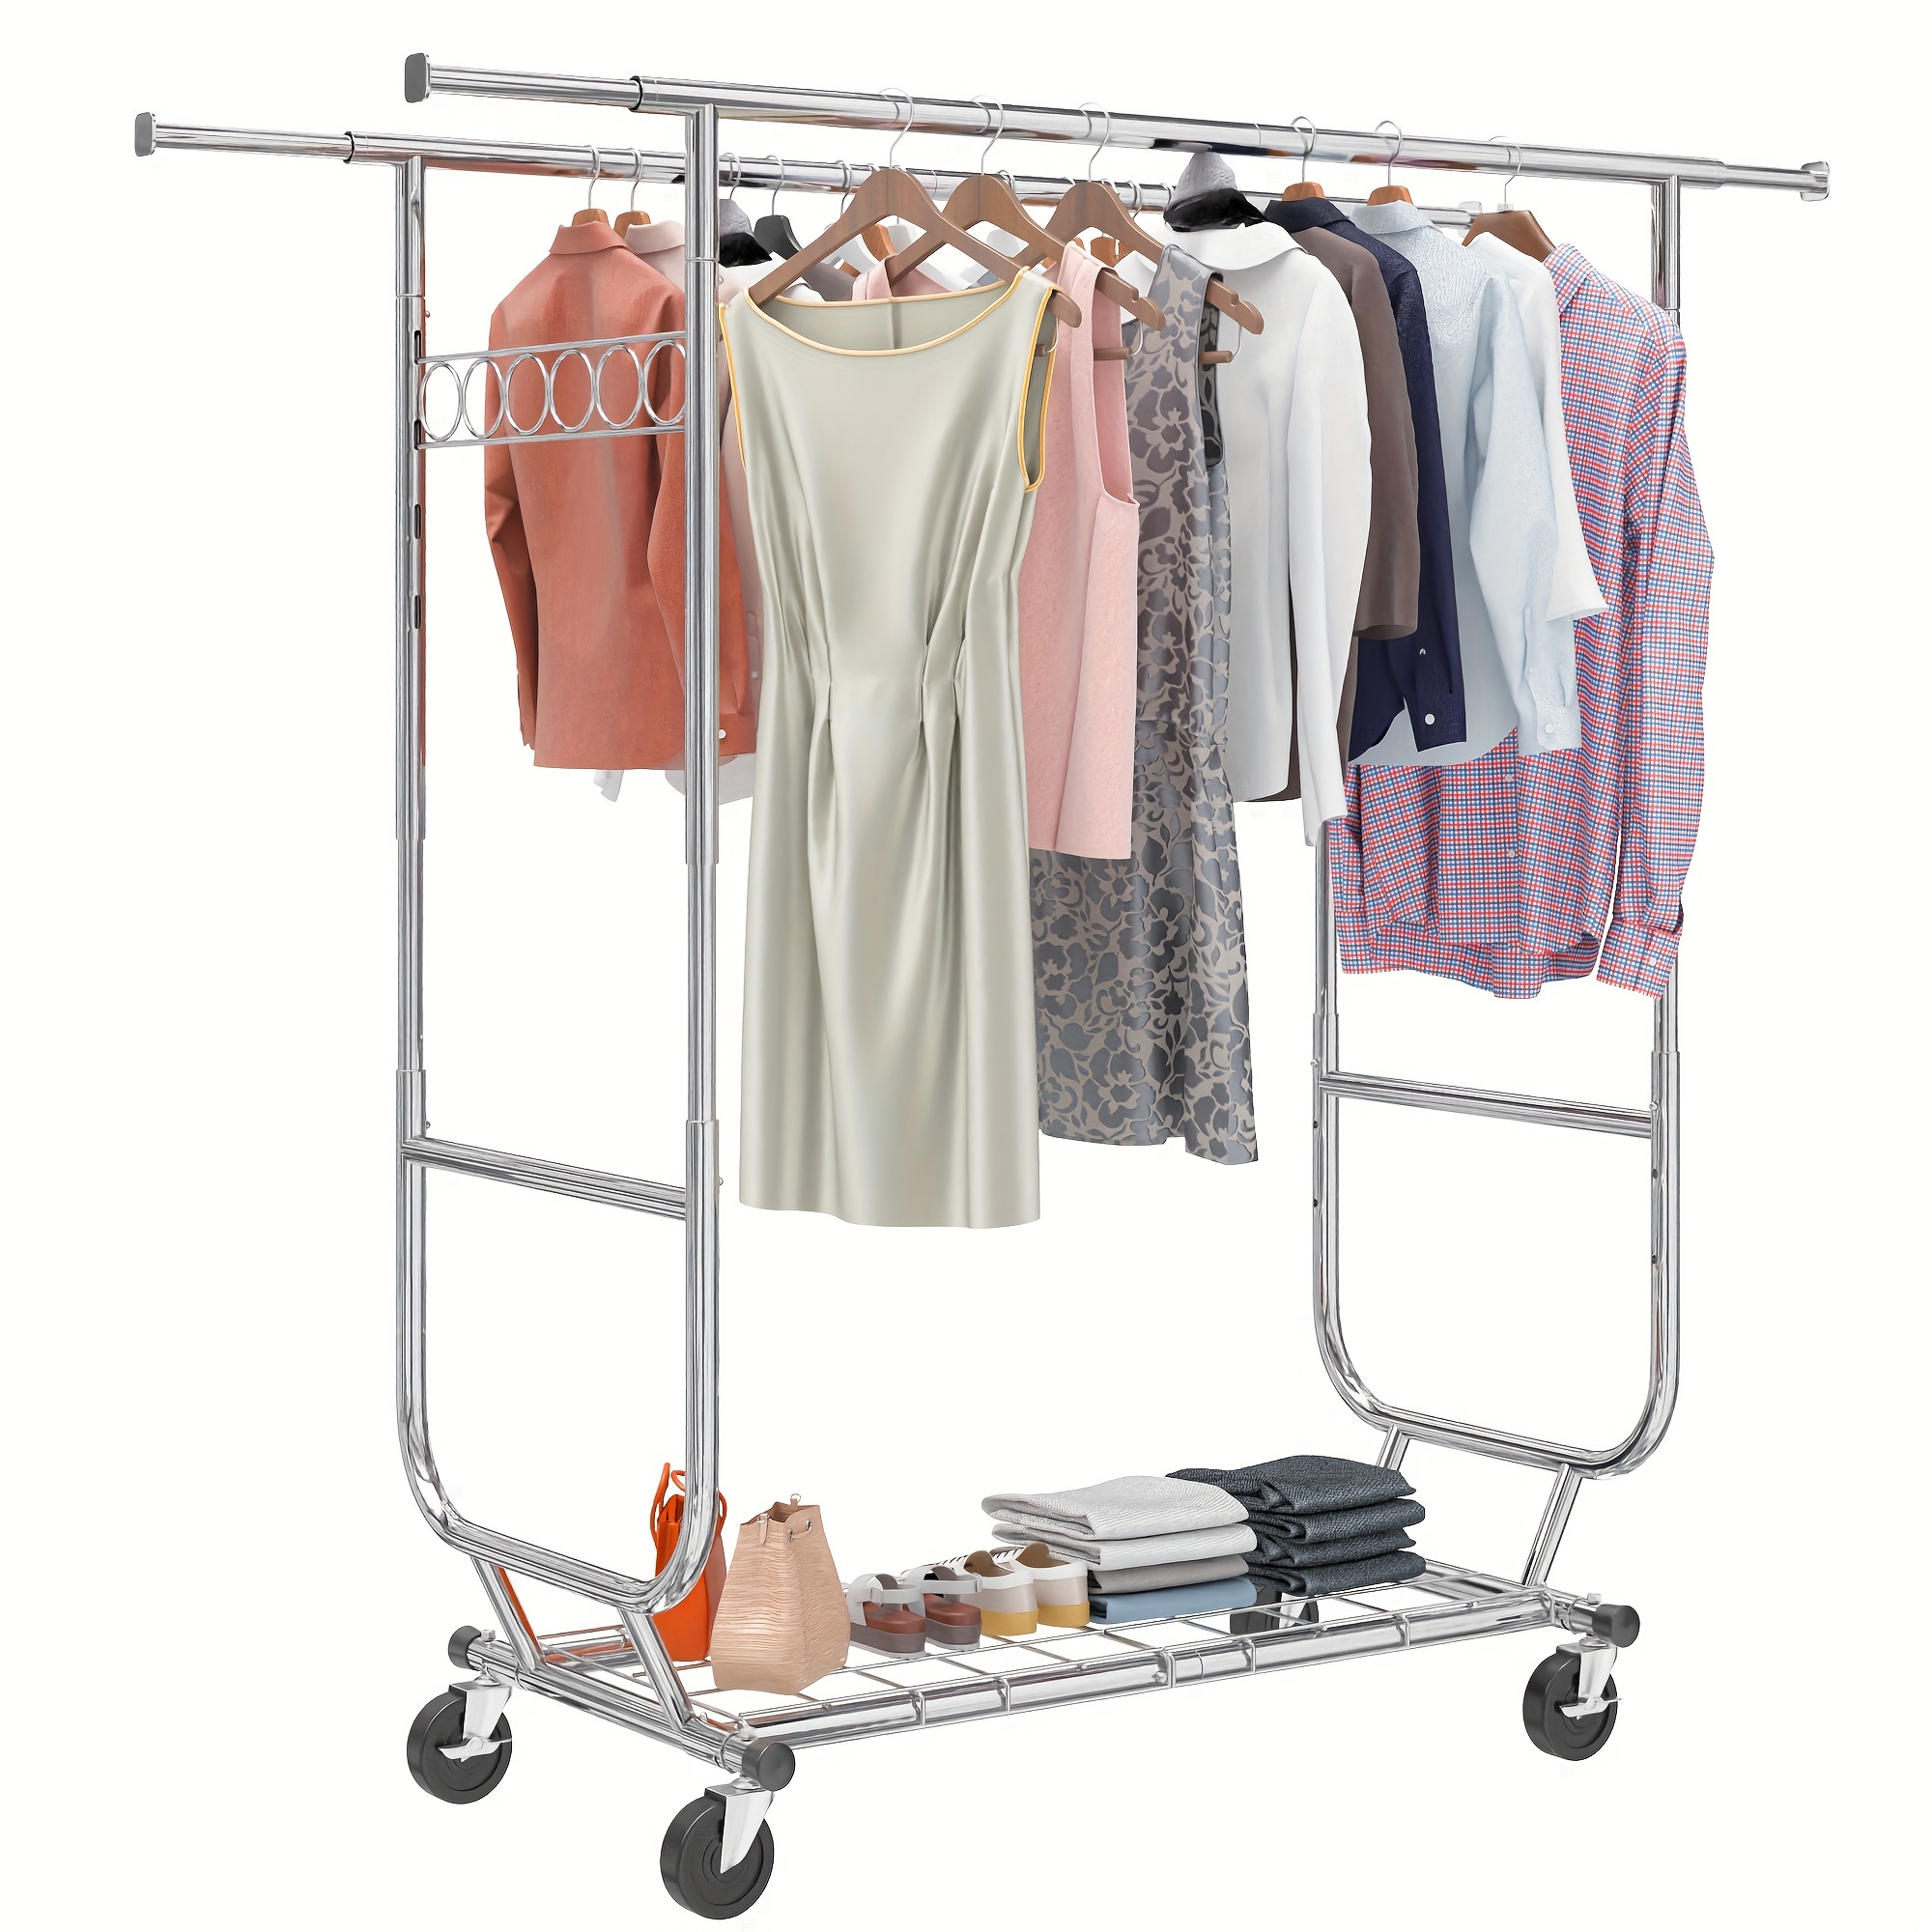 

Clothes Rack, Clothing Rack 610lbs Heavy Duty Clothes Rack With Wheels Clothing Racks For Hanging Clothes Rolling Clothes Rack Adjustable & Commercial Garment Rack 22" D X 76" W X 69" H